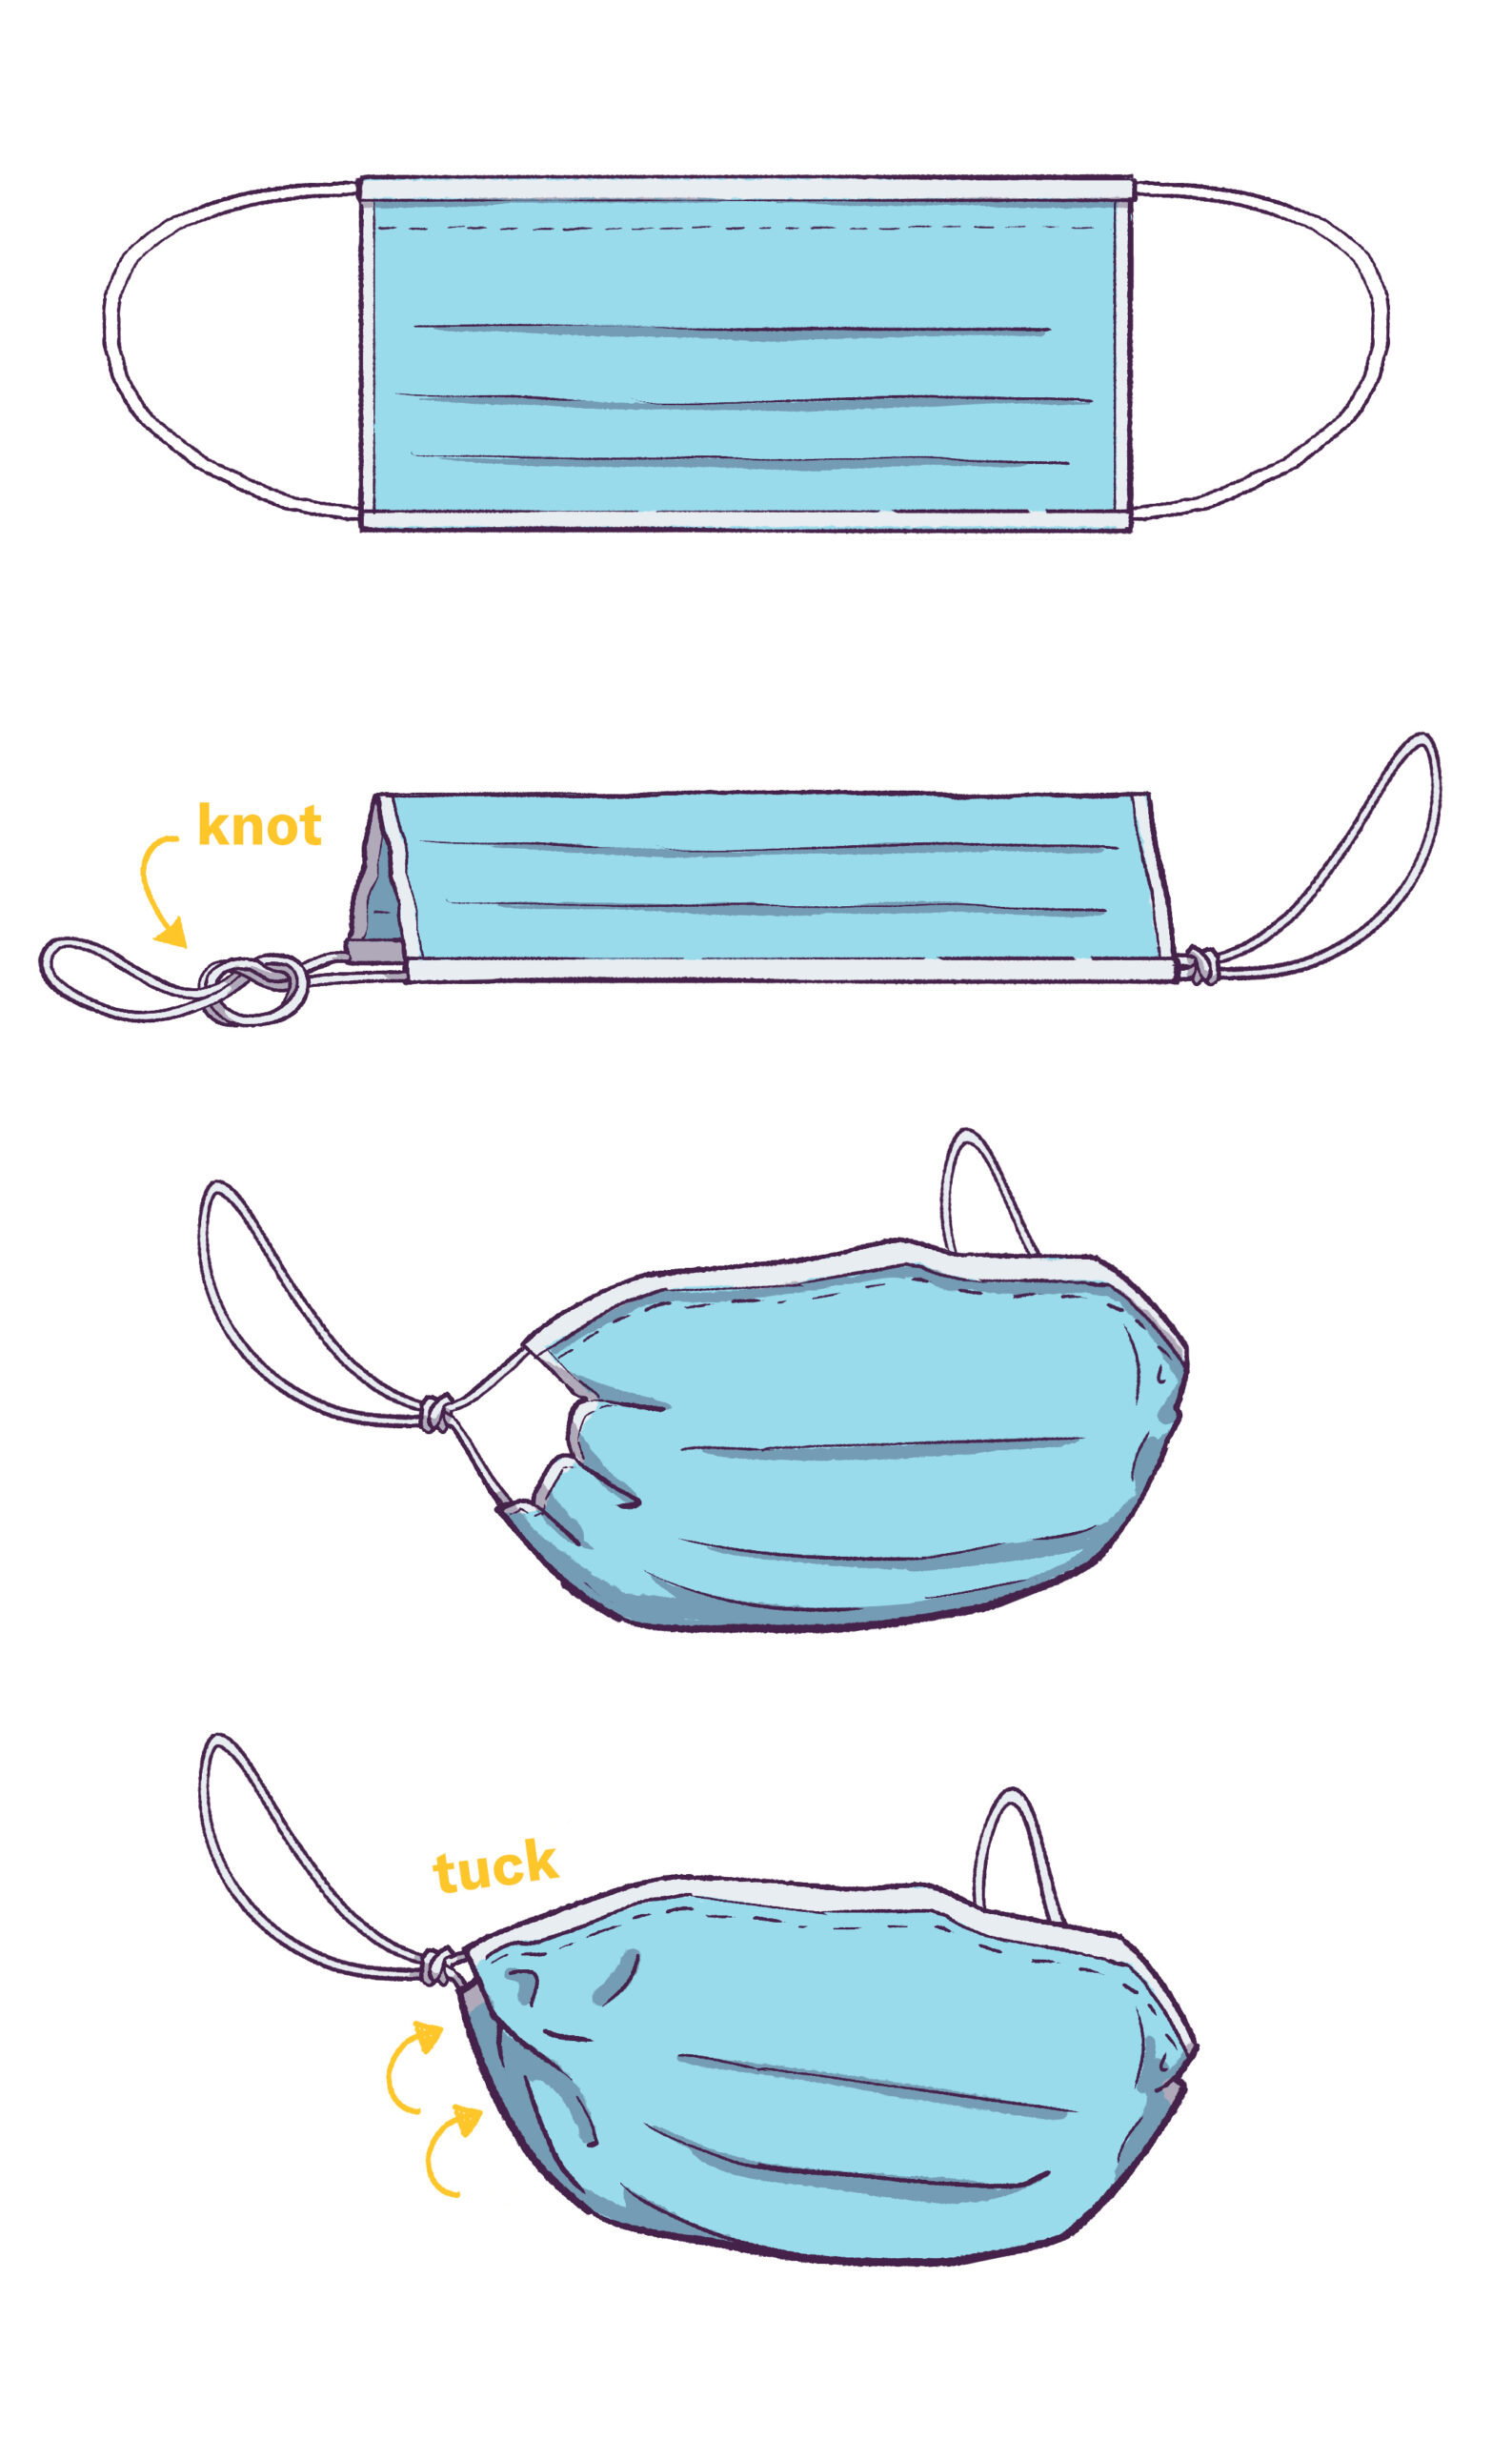 Illustration of loop knot for effective masking to prevent COVID-19